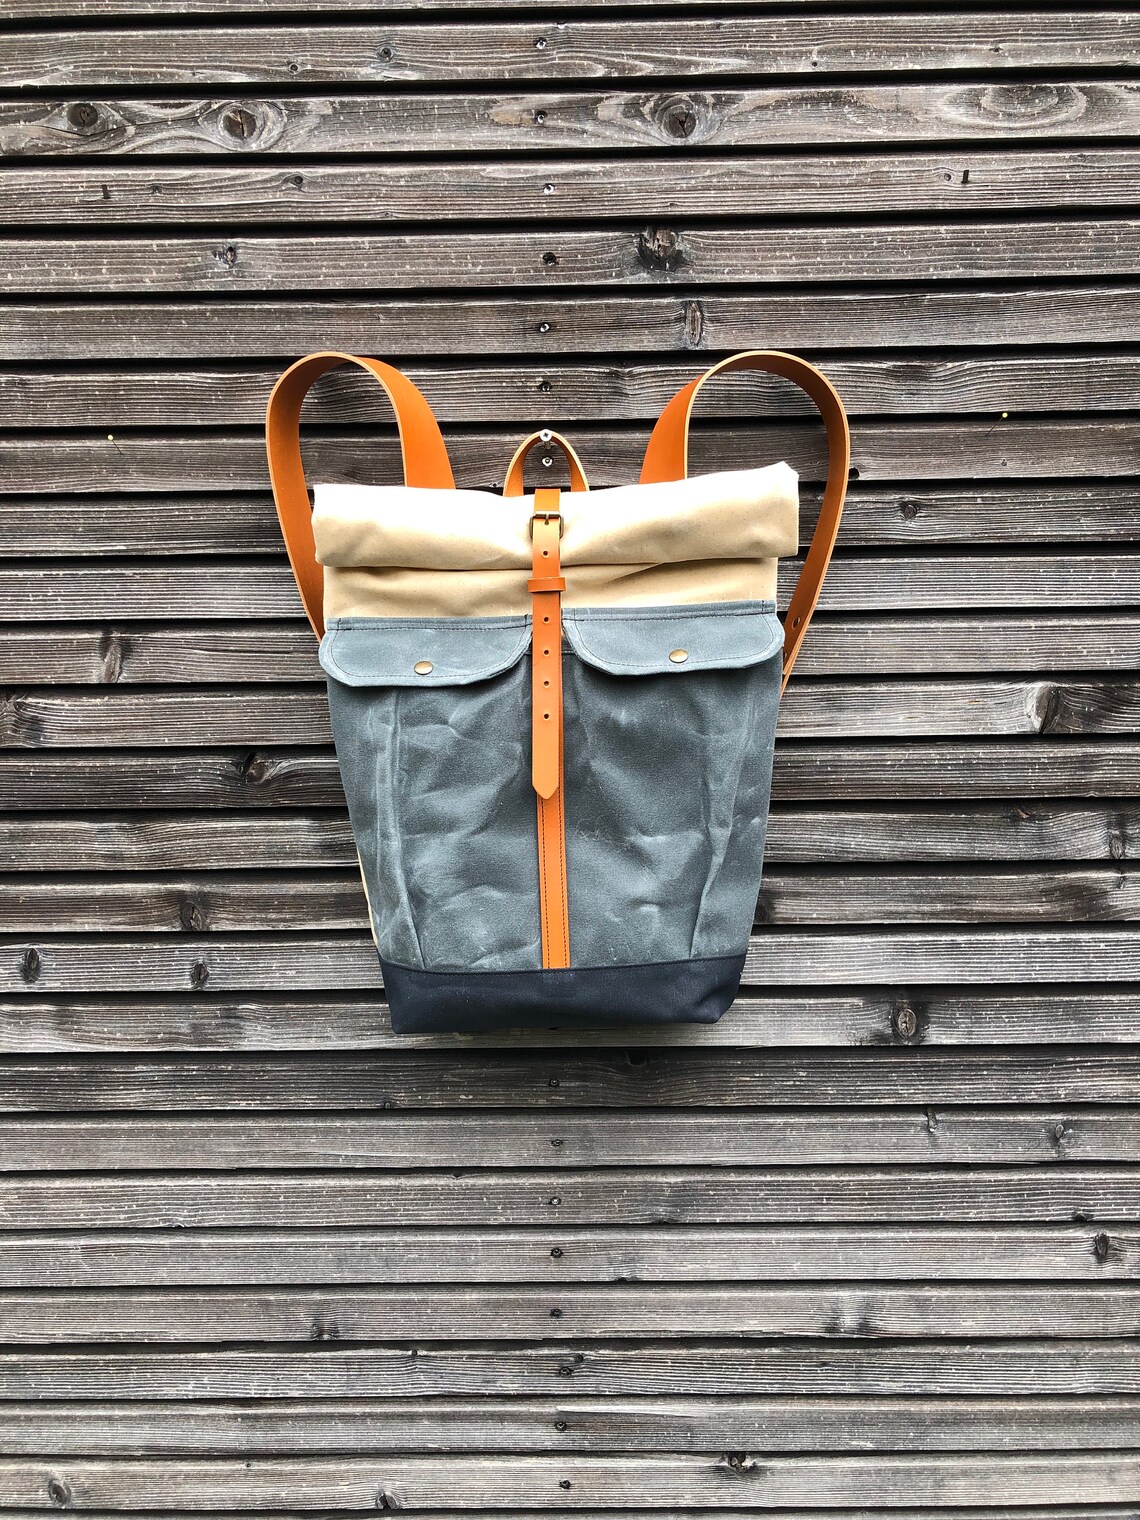 Waxed Canvas Backpack With Roll to Close Top and Vegetable - Etsy